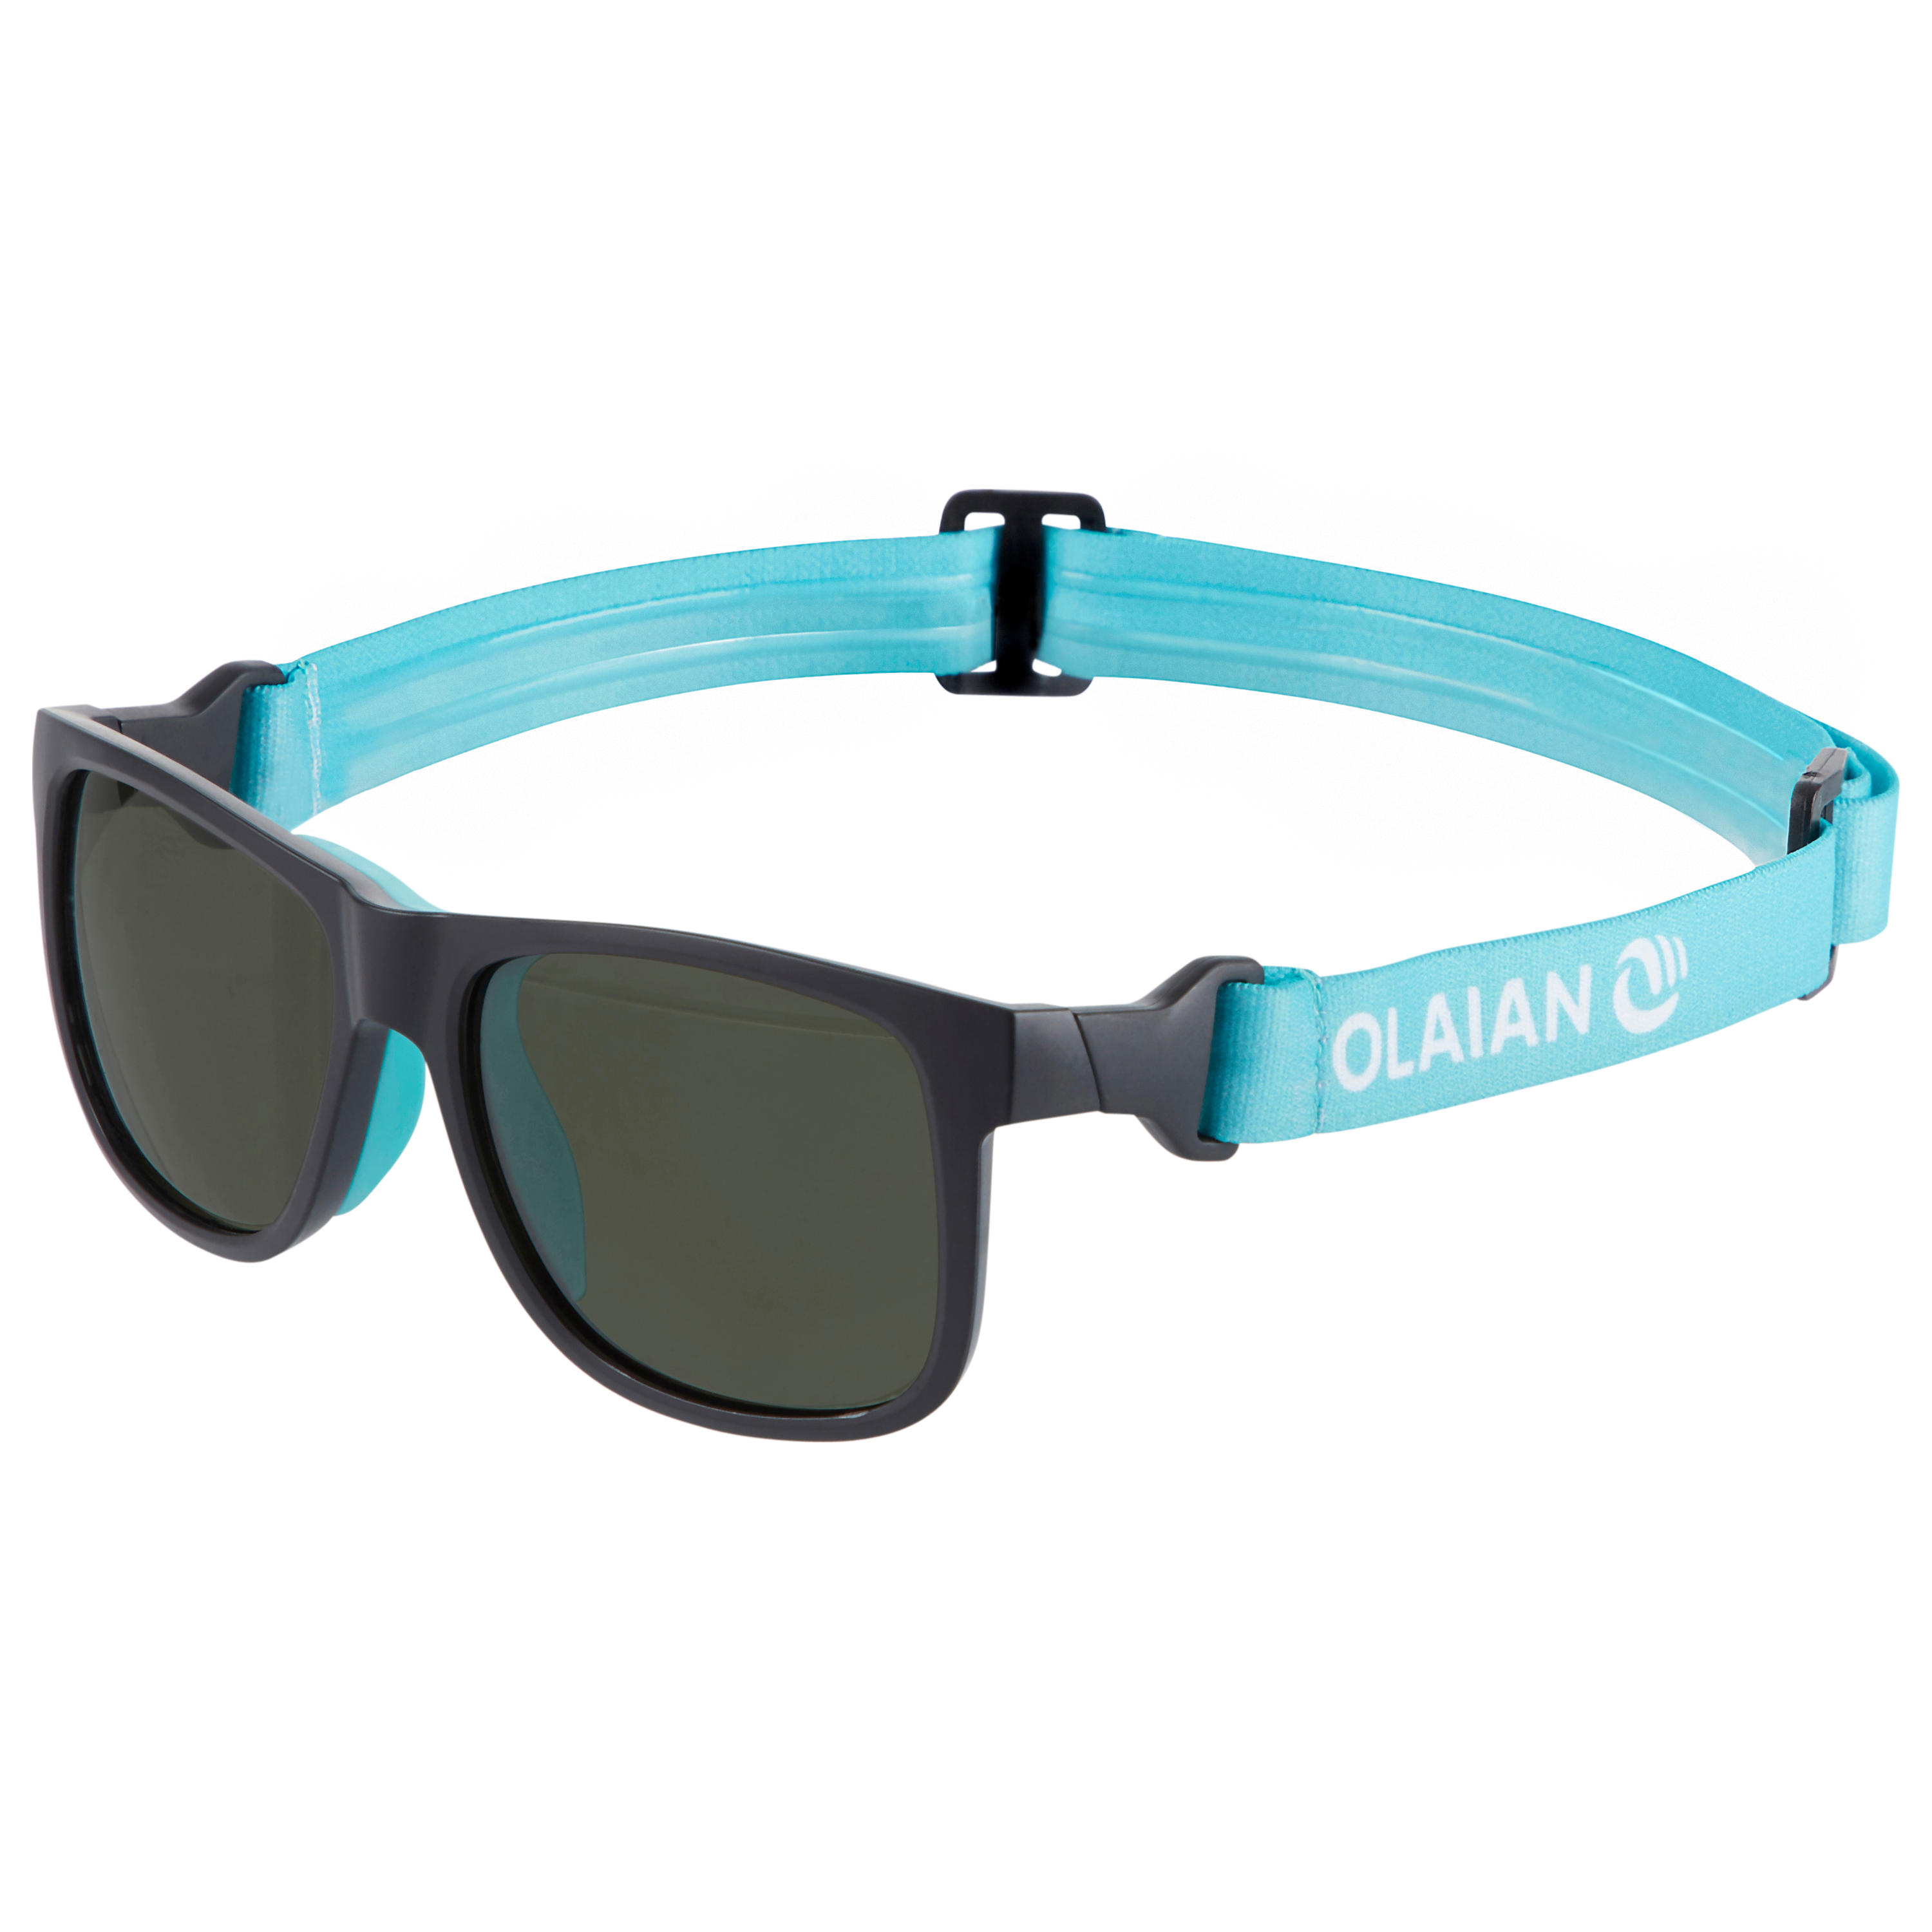 Surfing Sunglasses .Suitable for 